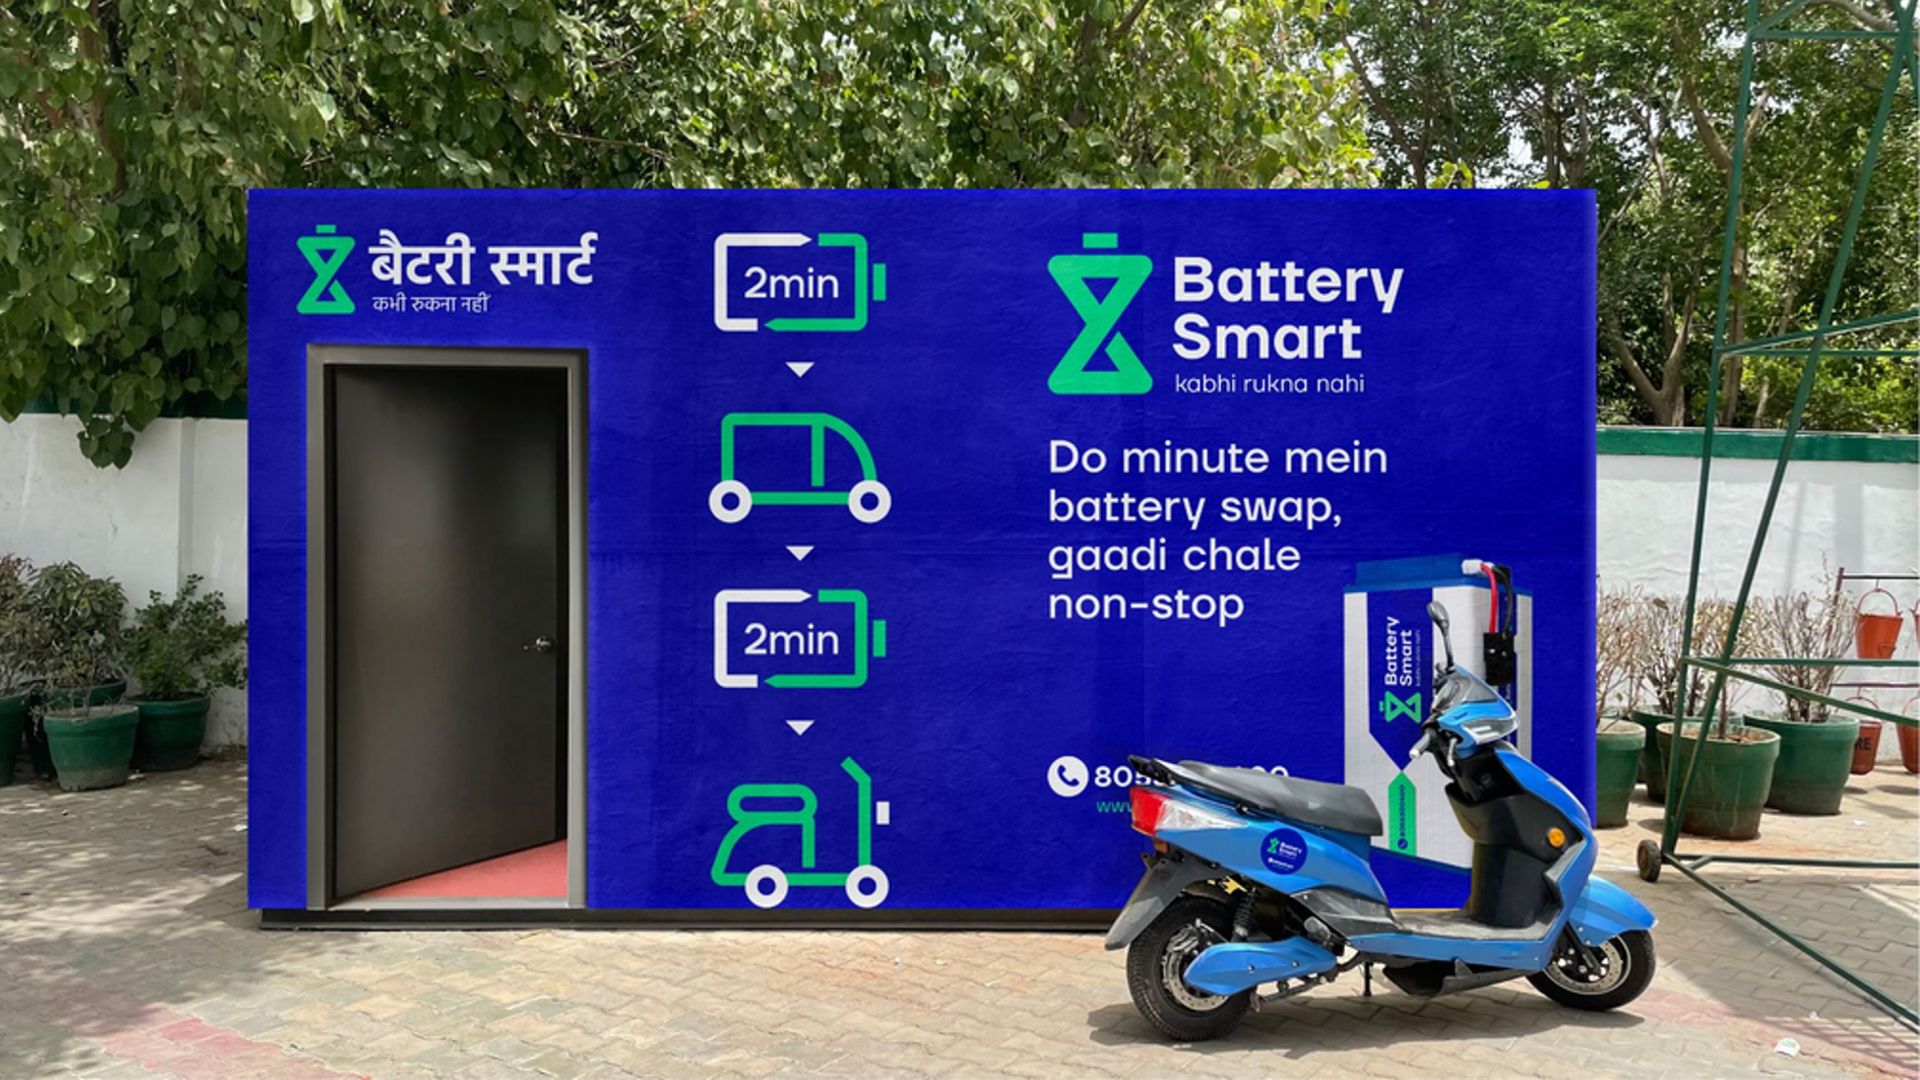 Battery Smart provide Zepto with 1000+ battery swapping stations (Source: Battery Swap)